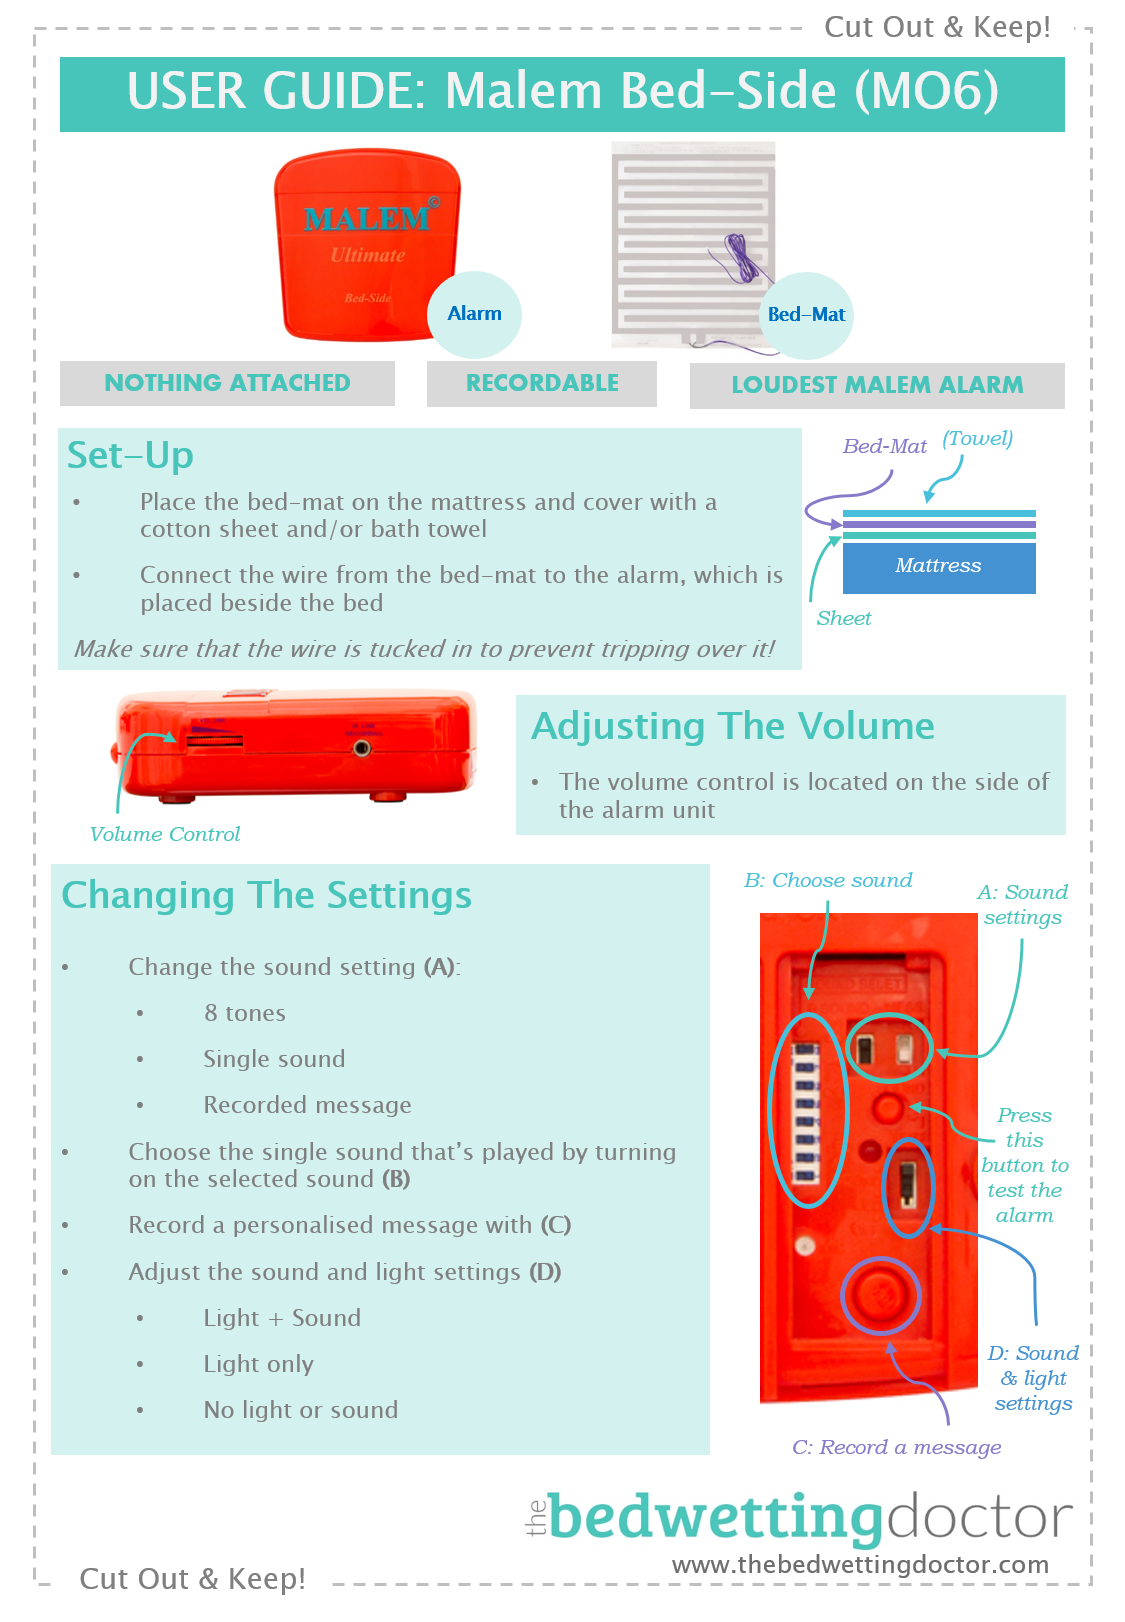 Malem Bed-Side (MO6) Bedwetting Alarm user guide